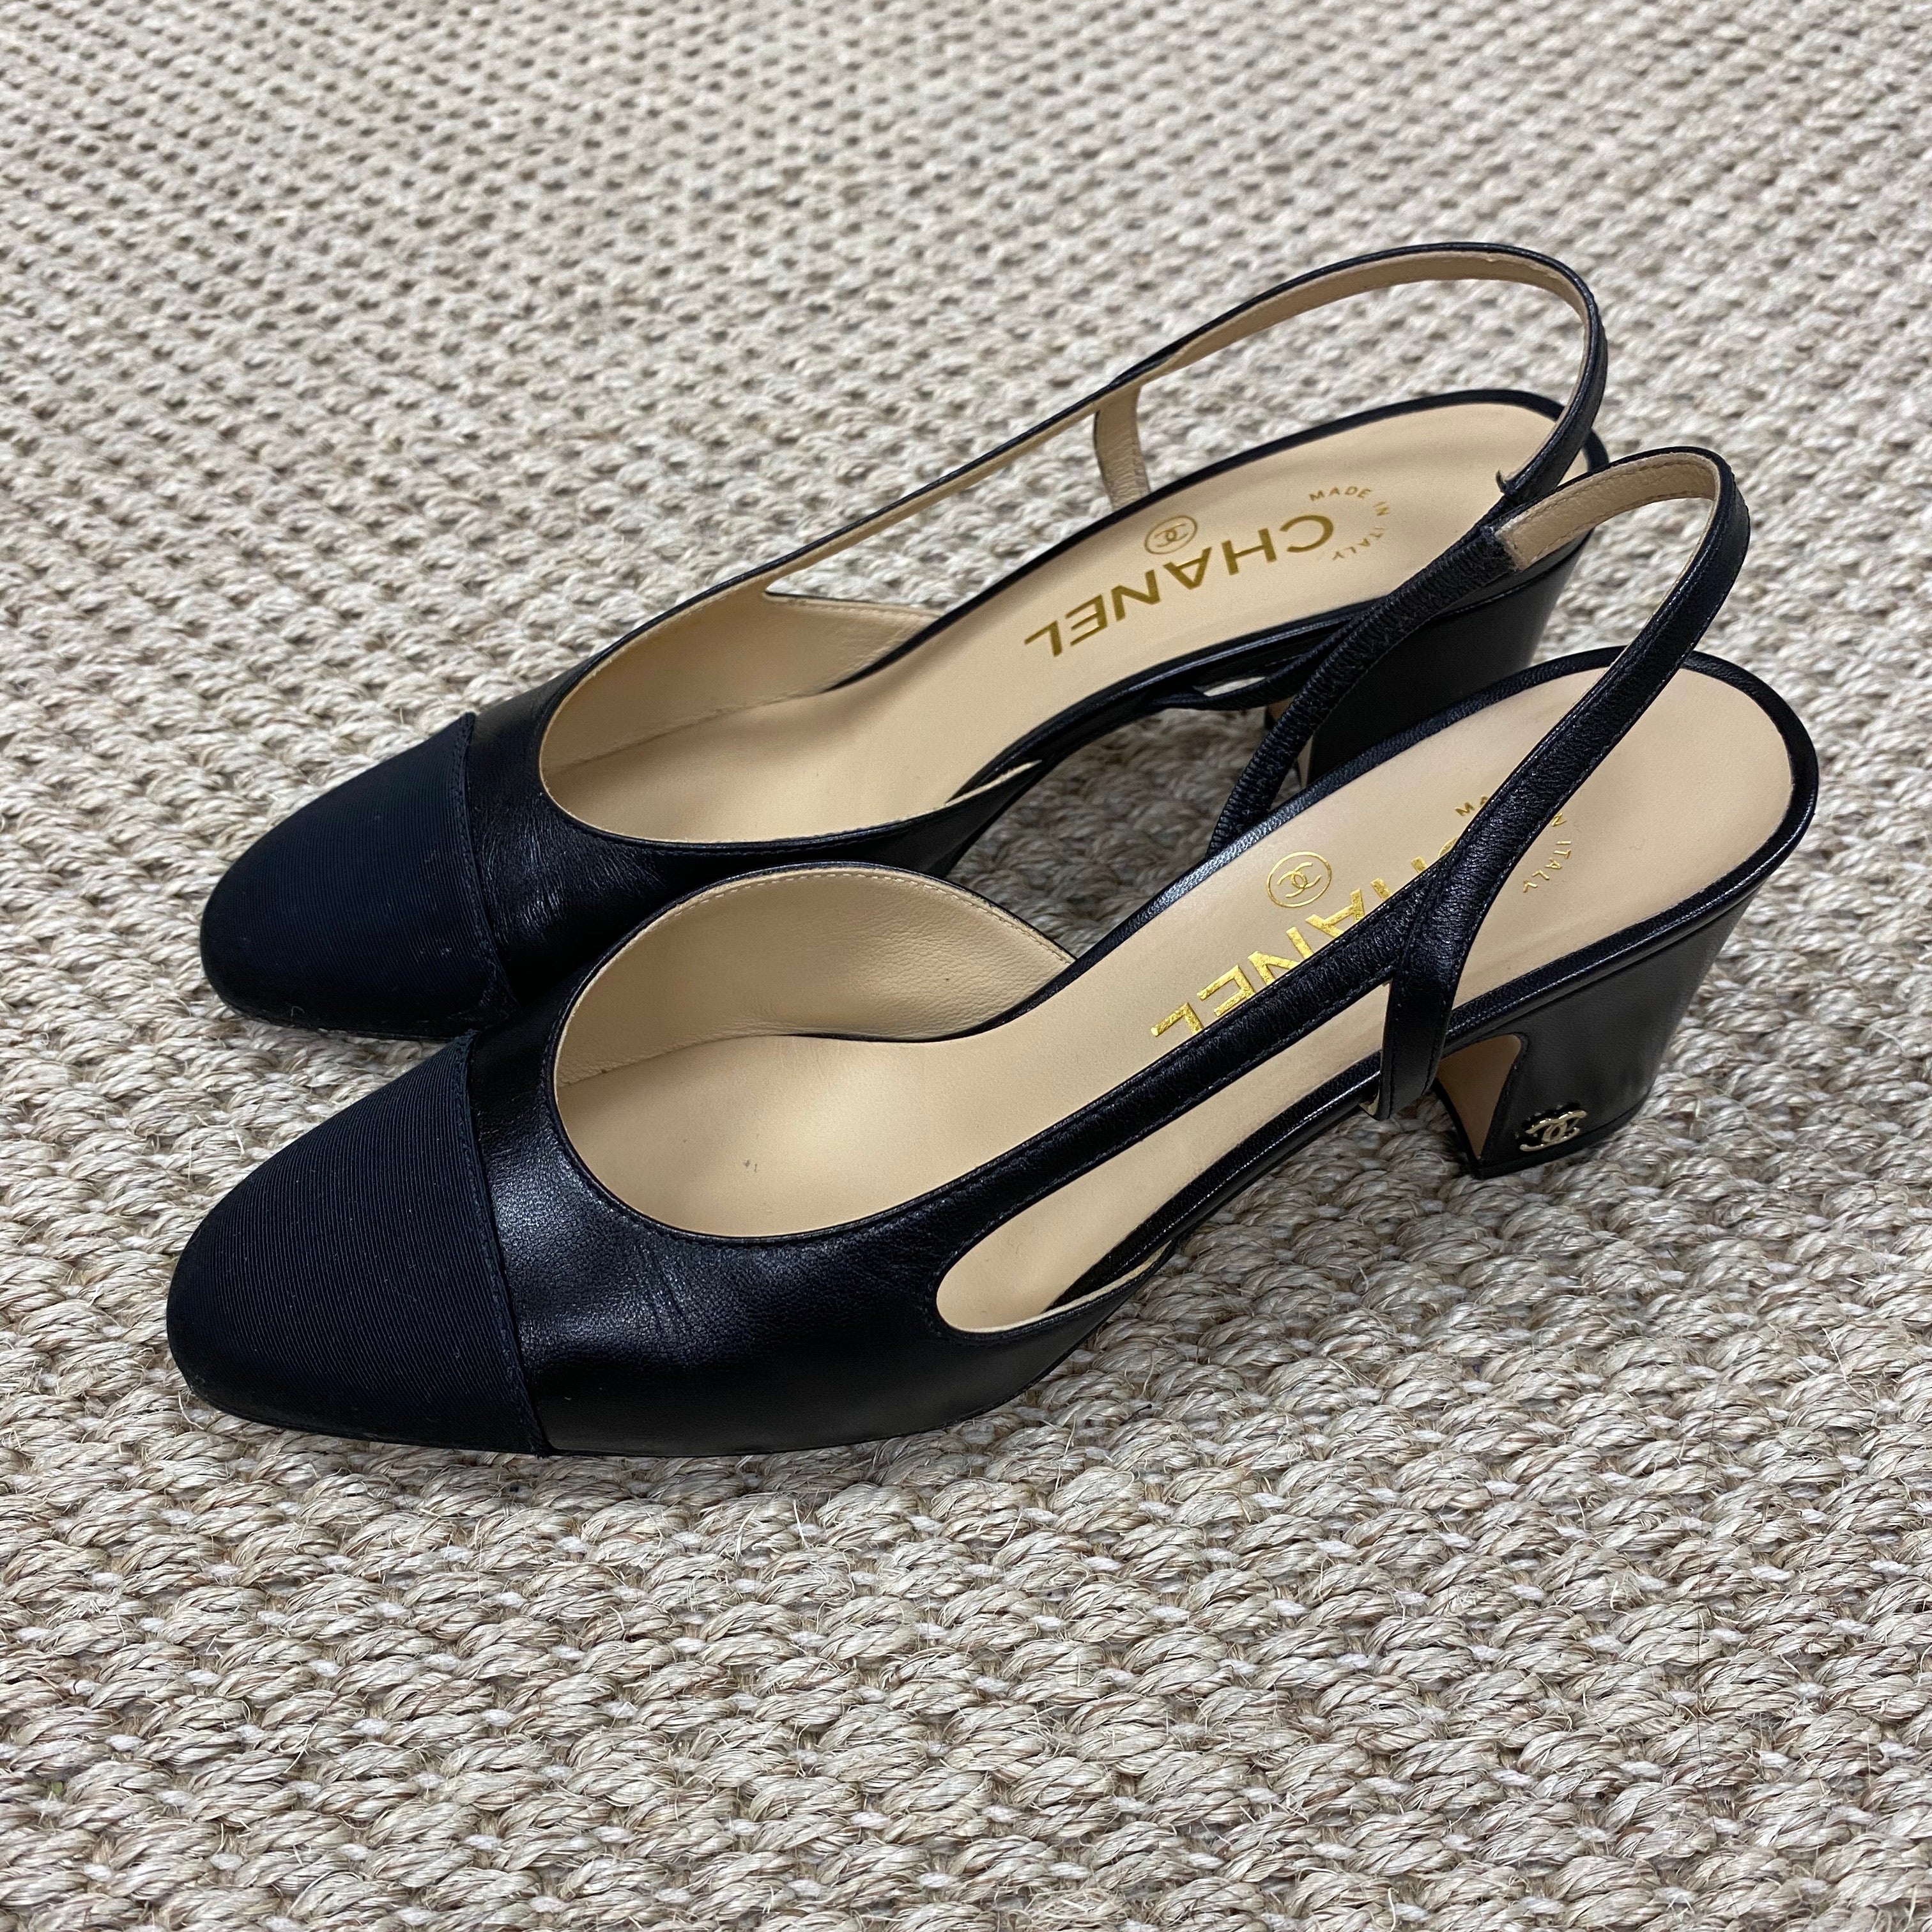 chanel slingback shoes for women 8 wide